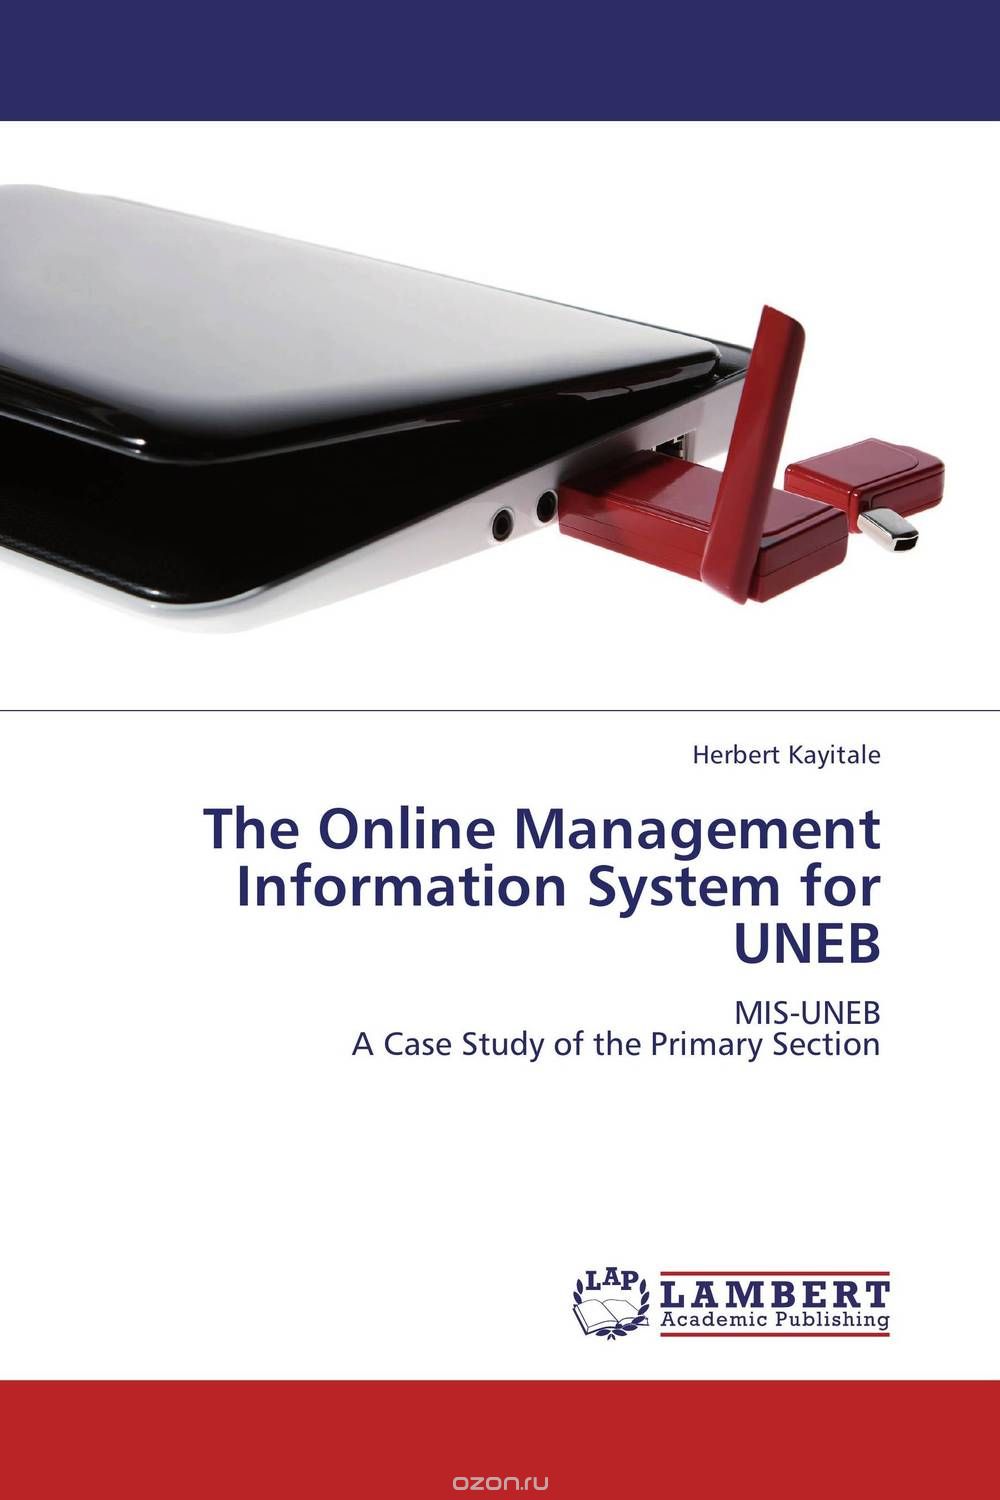 The Online Management Information System for UNEB